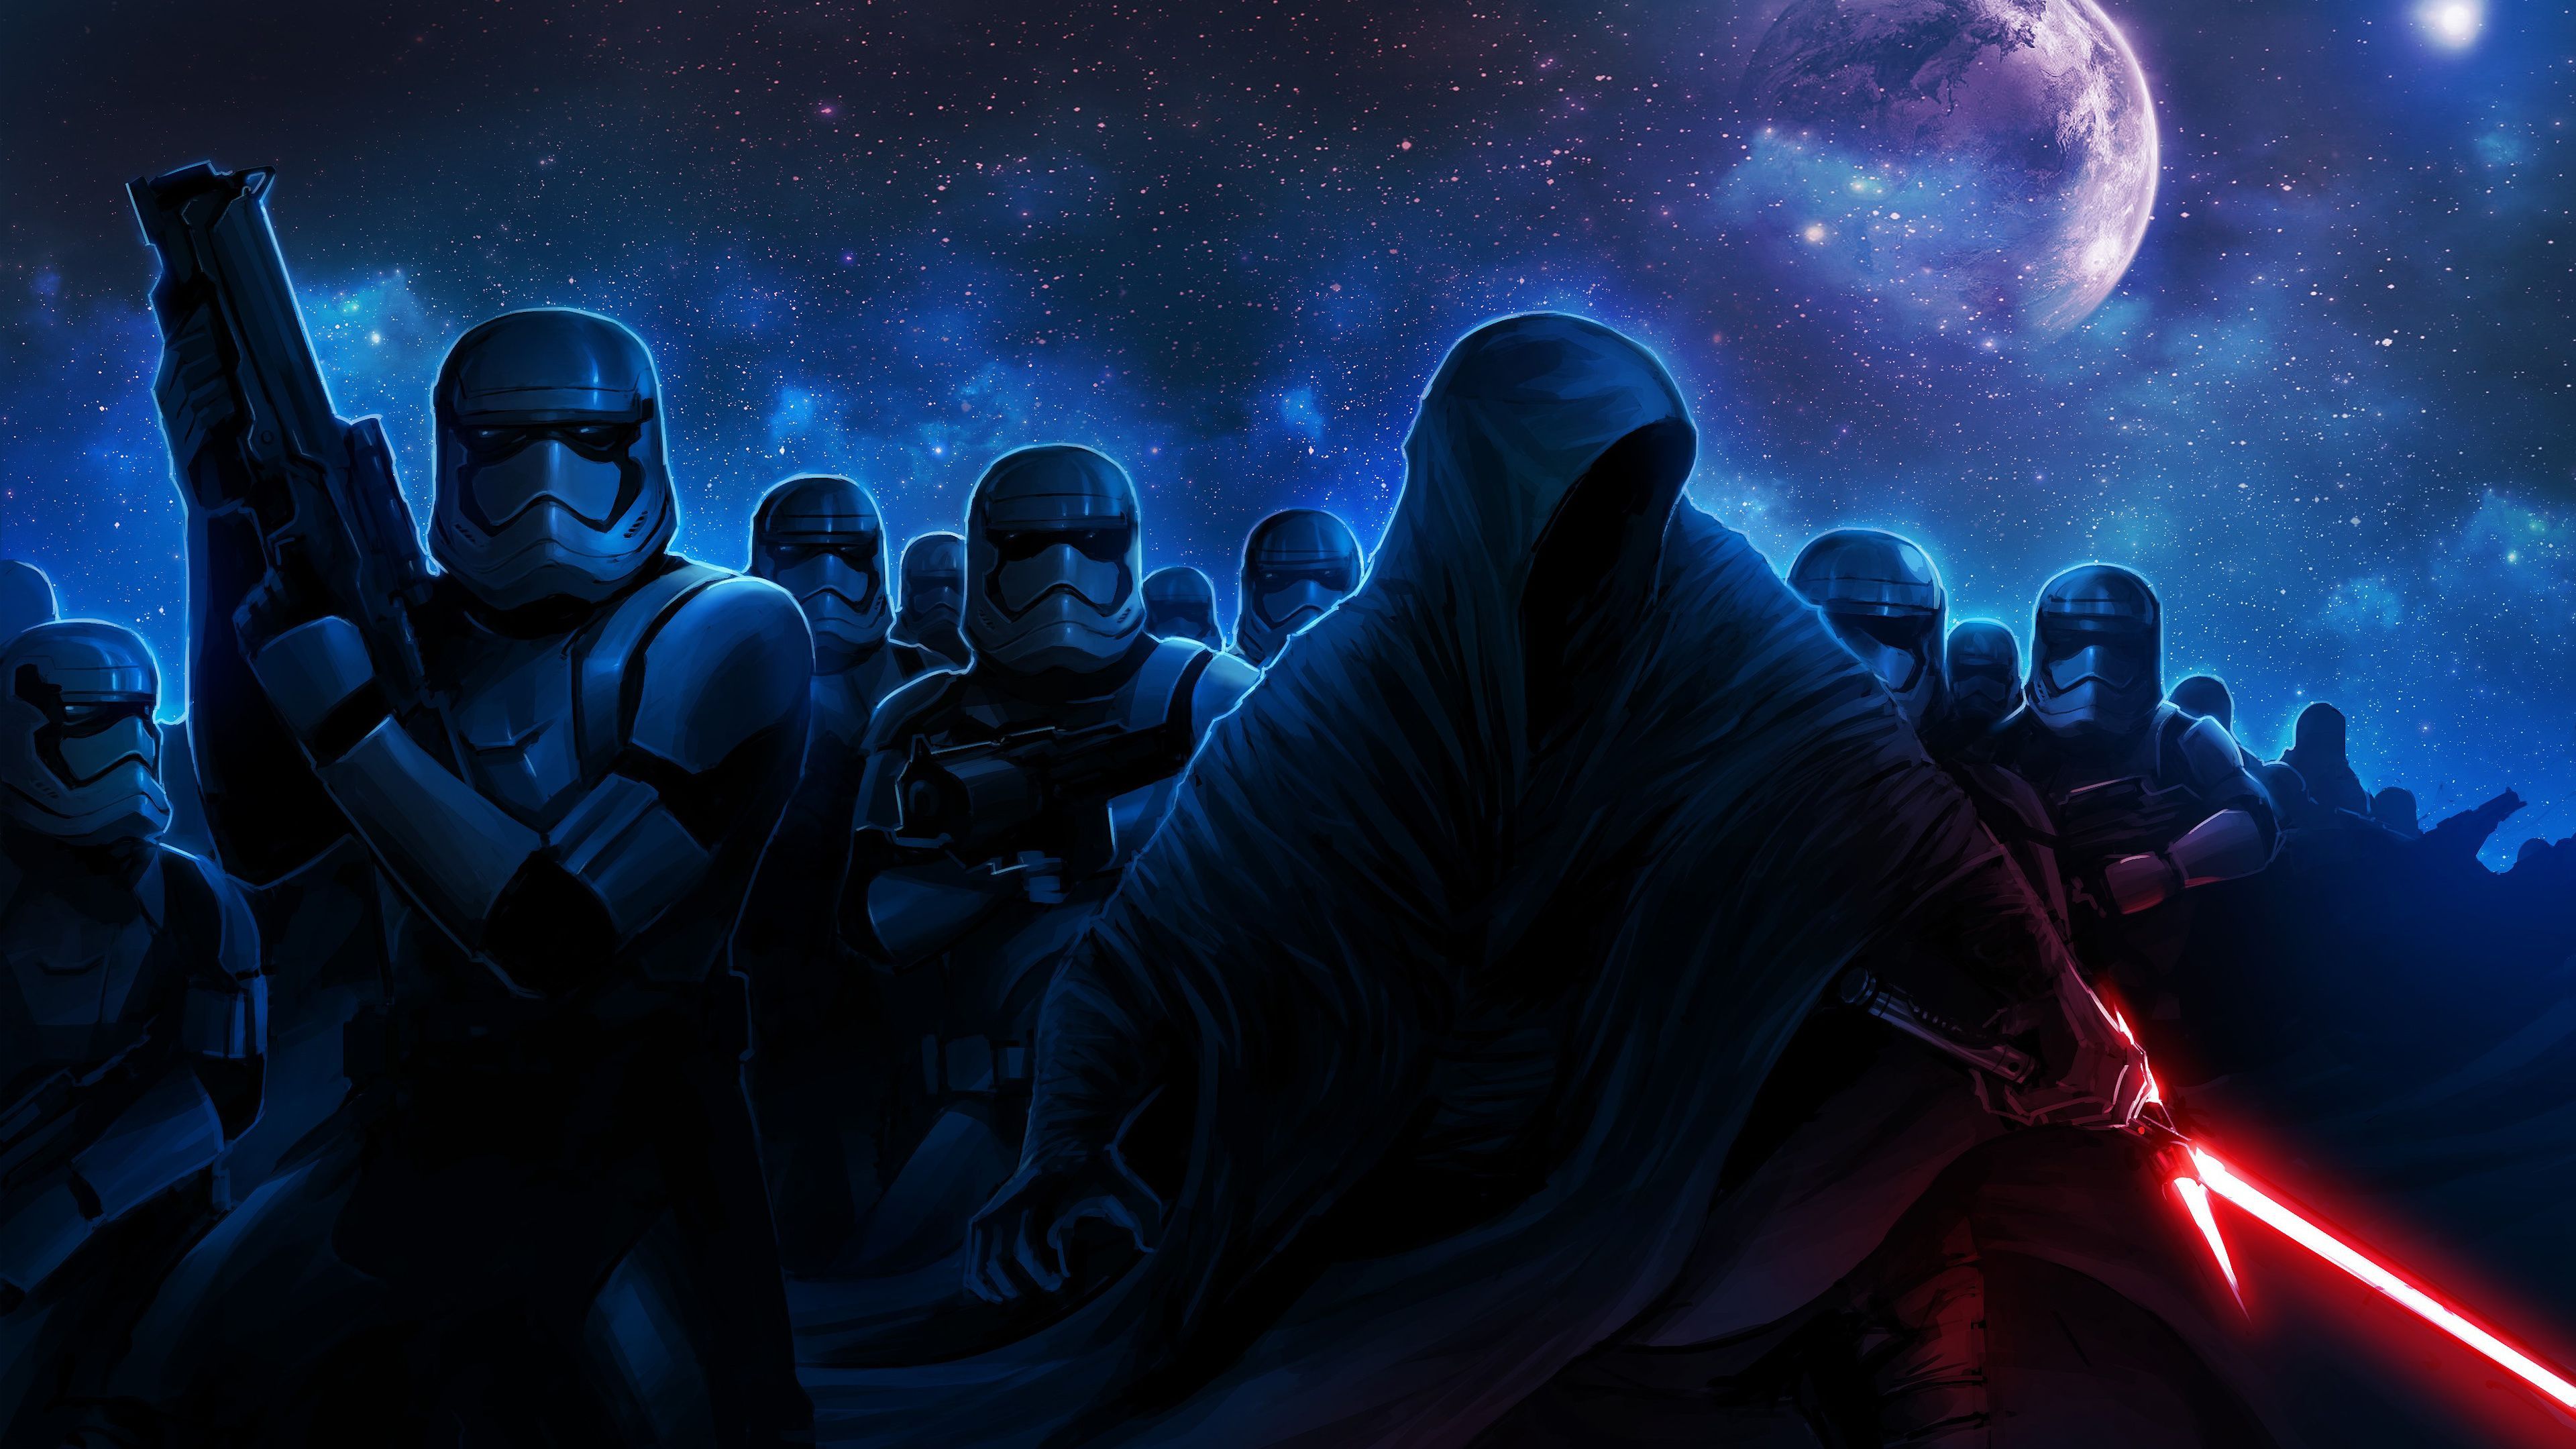 Stormtroopers Darth Vader Wallpapers | HD Wallpapers